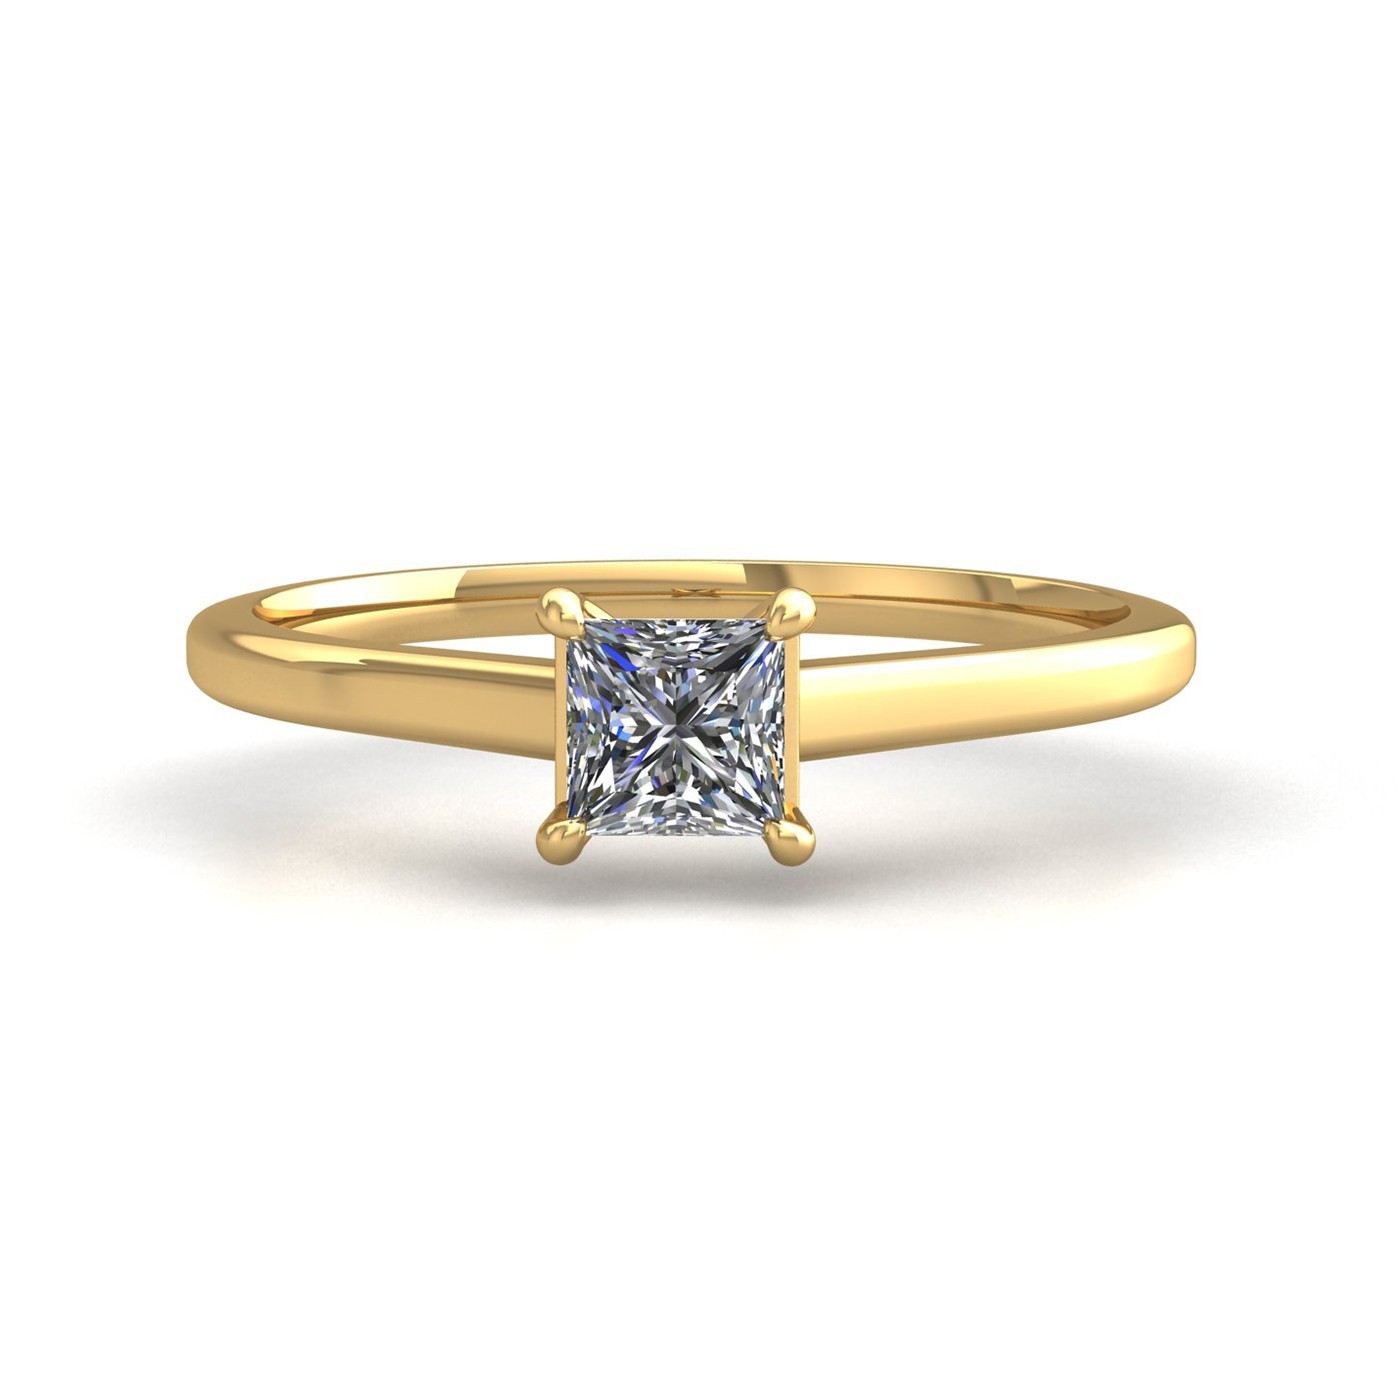 18k yellow gold  1,50 ct 4 prongs solitaire princess cut diamond engagement ring with whisper thin band Photos & images